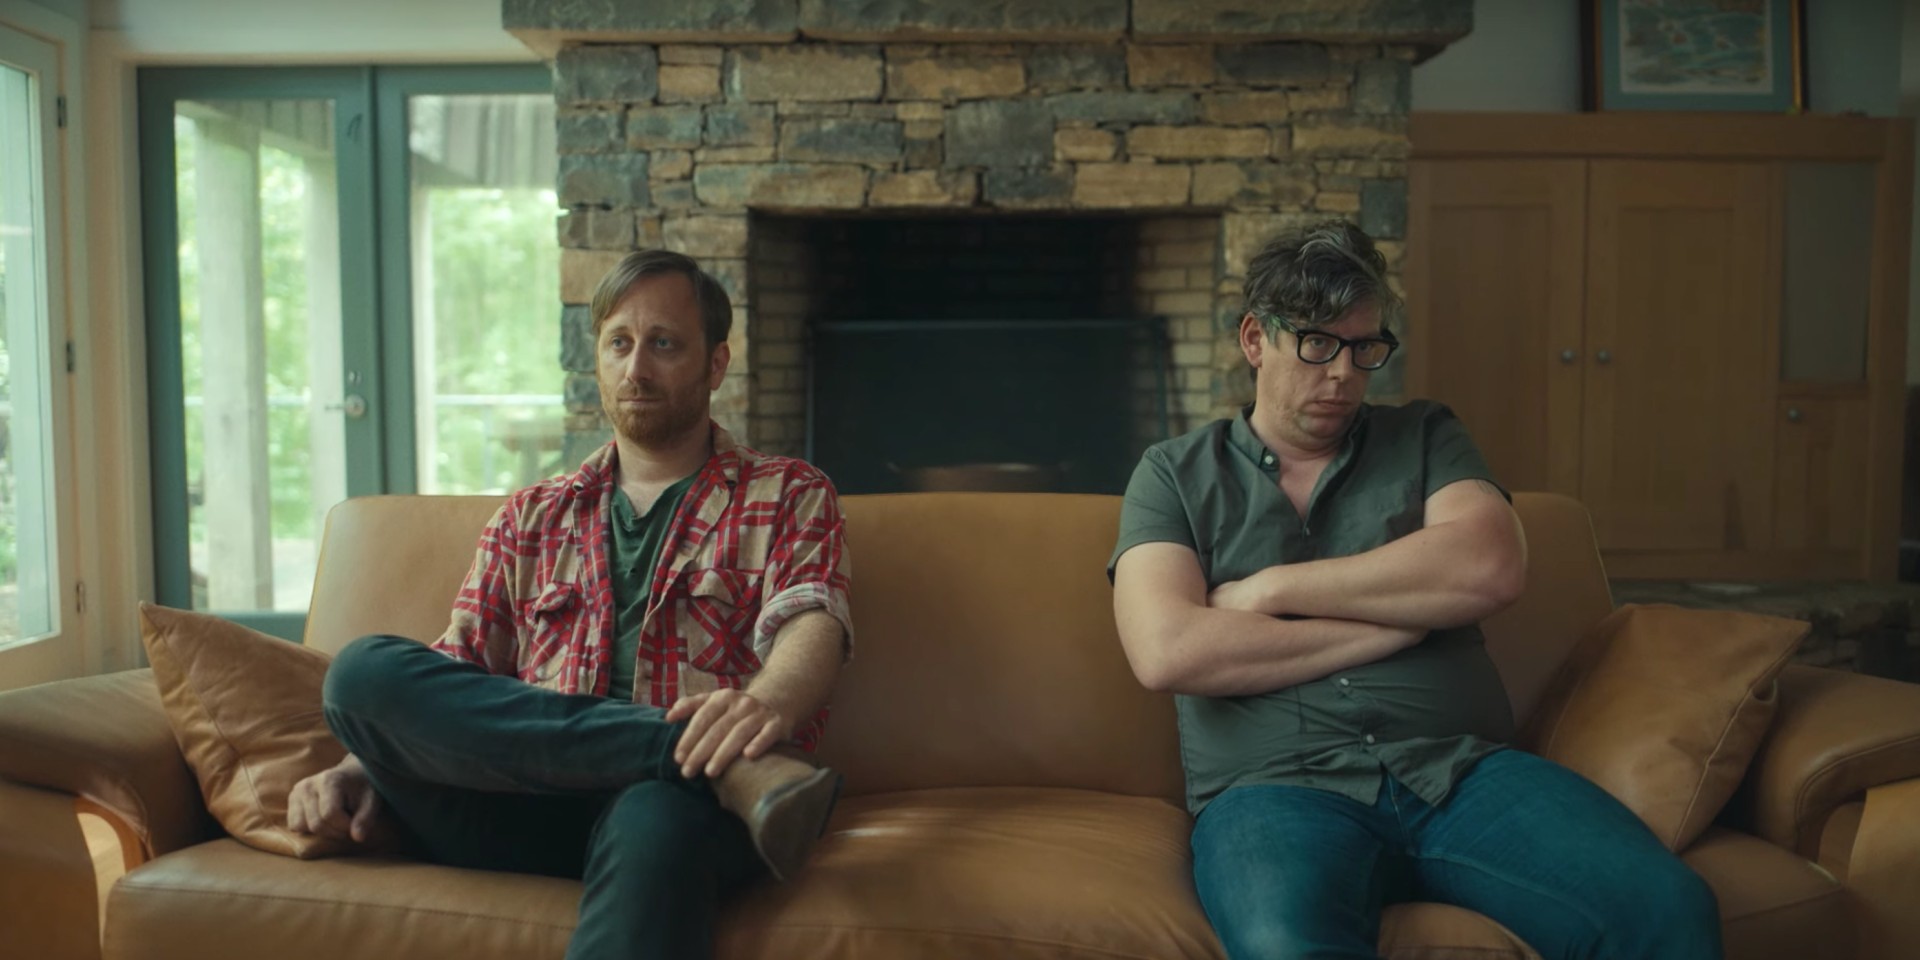 The Black Keys turn to therapy in new music video for 'Go' – watch